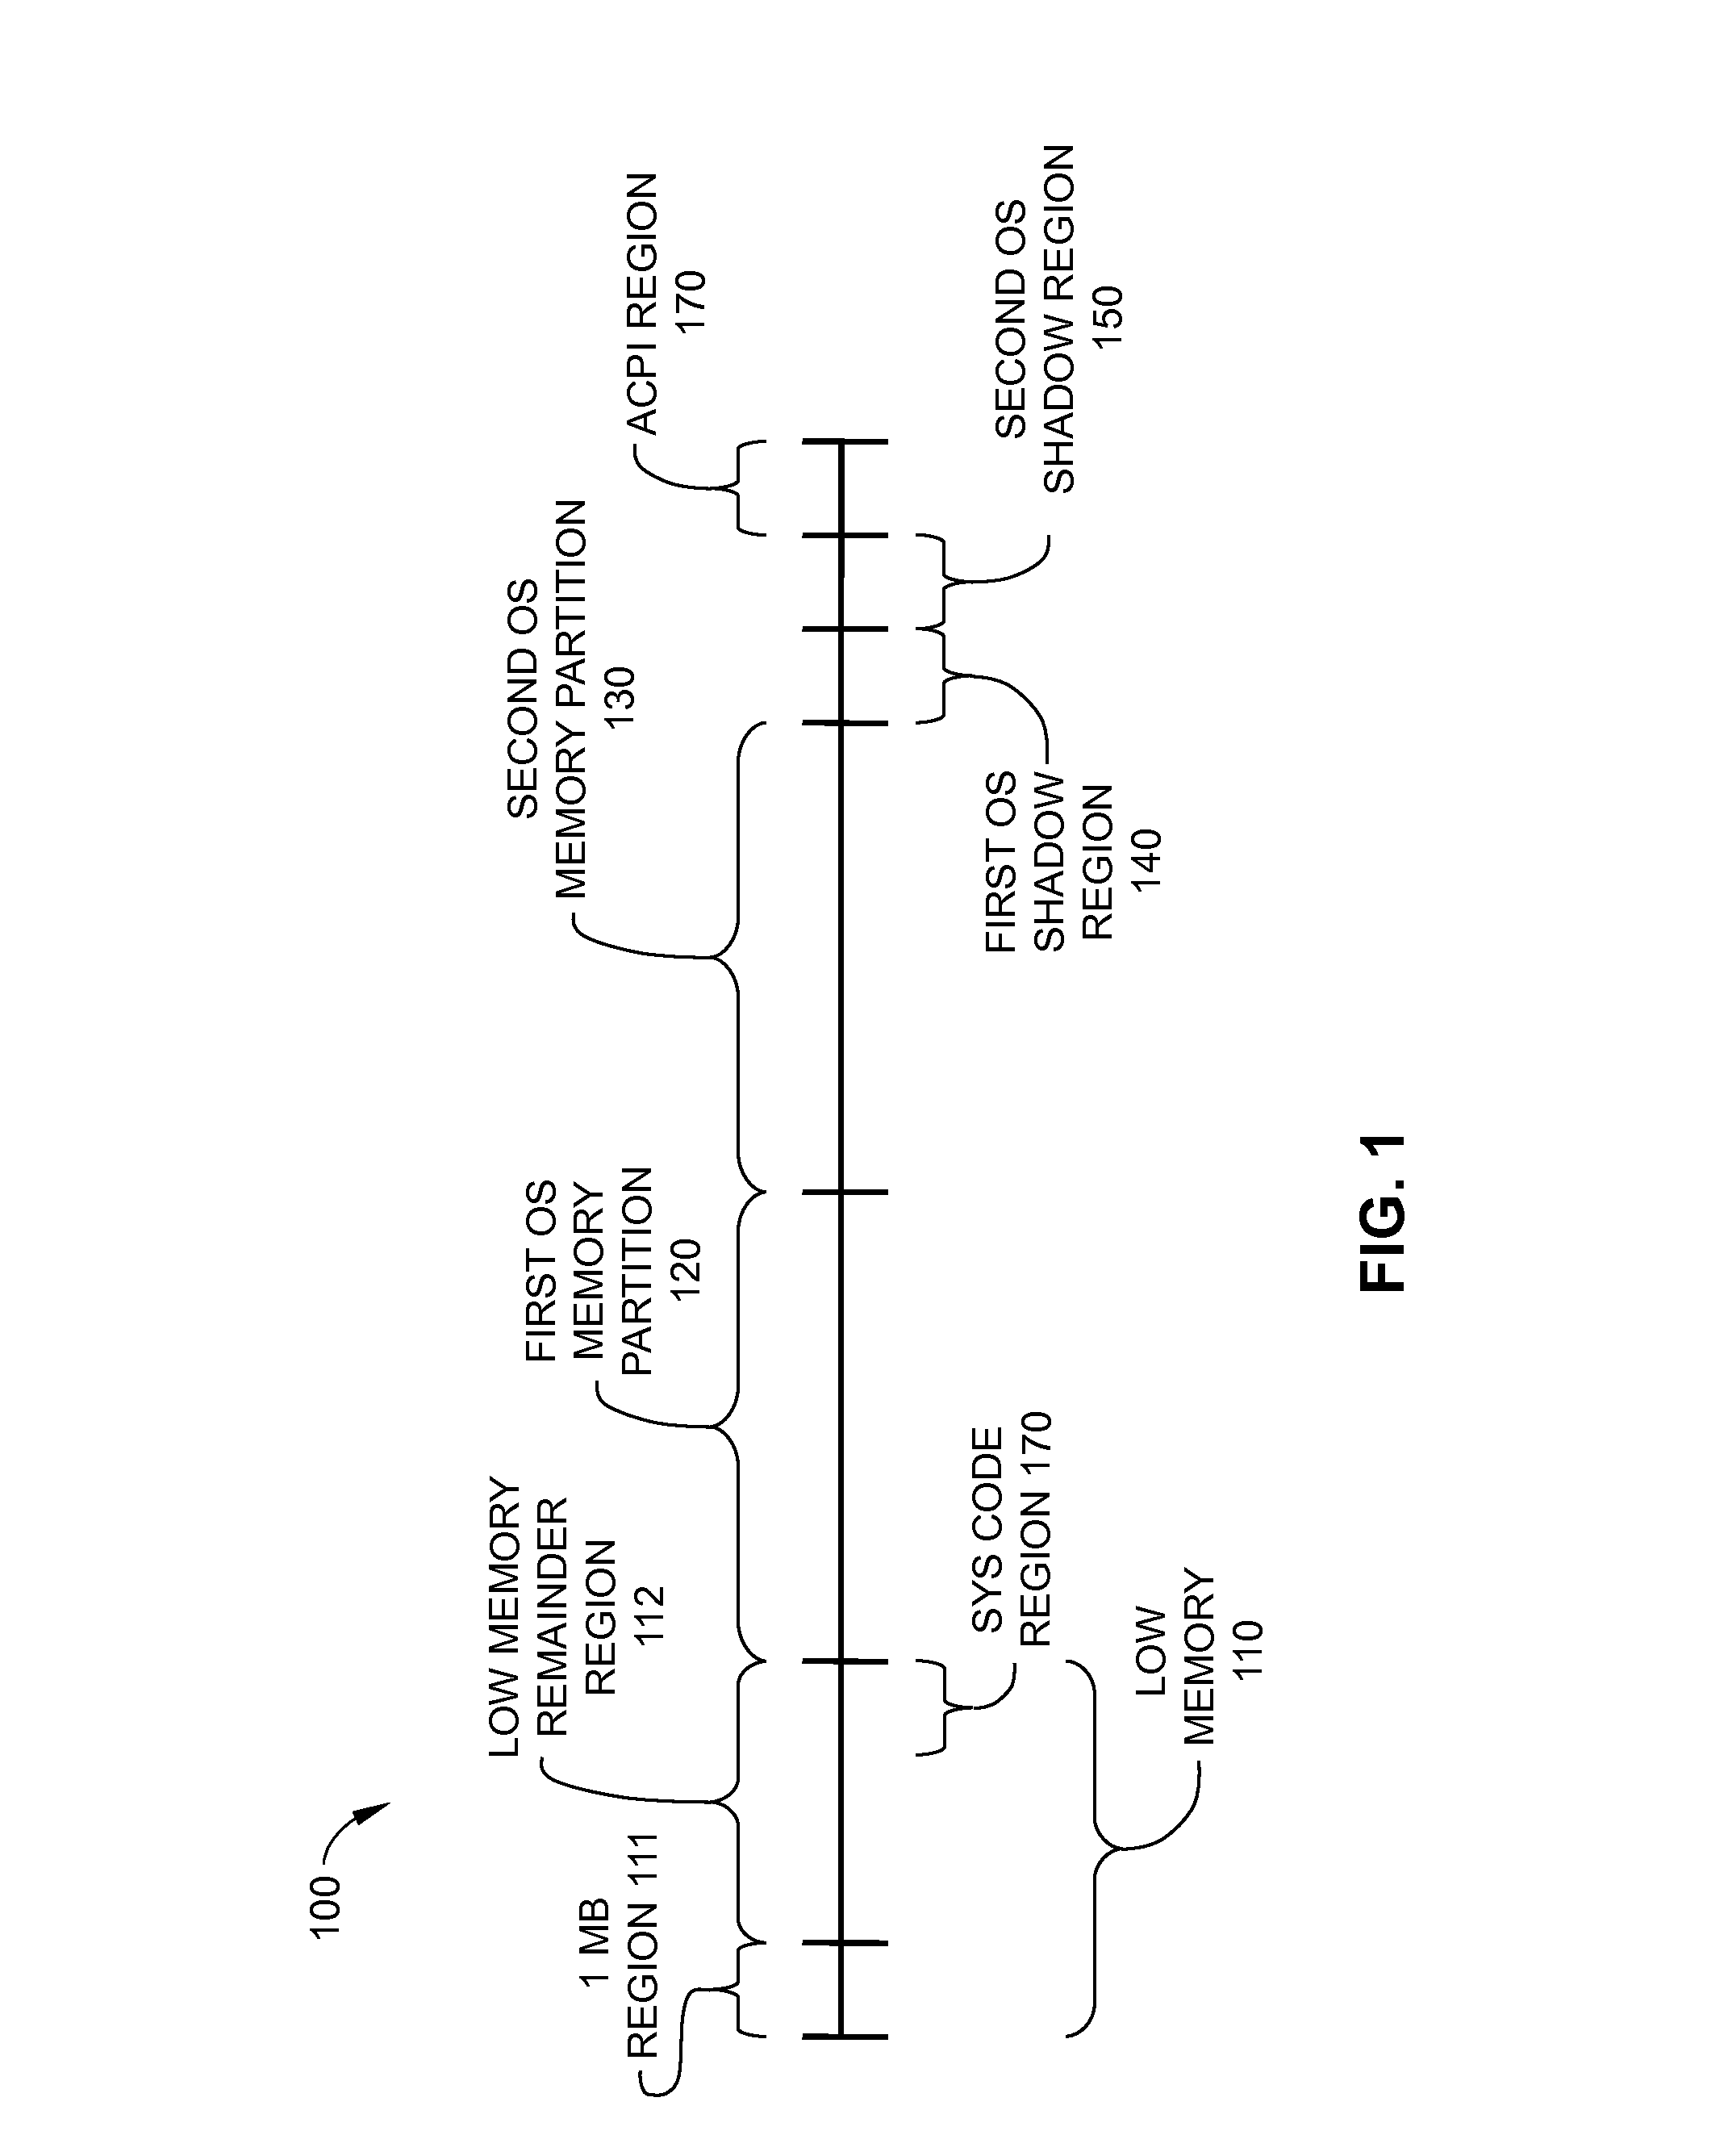 Method of running multiple operating systems on an x86-based computer